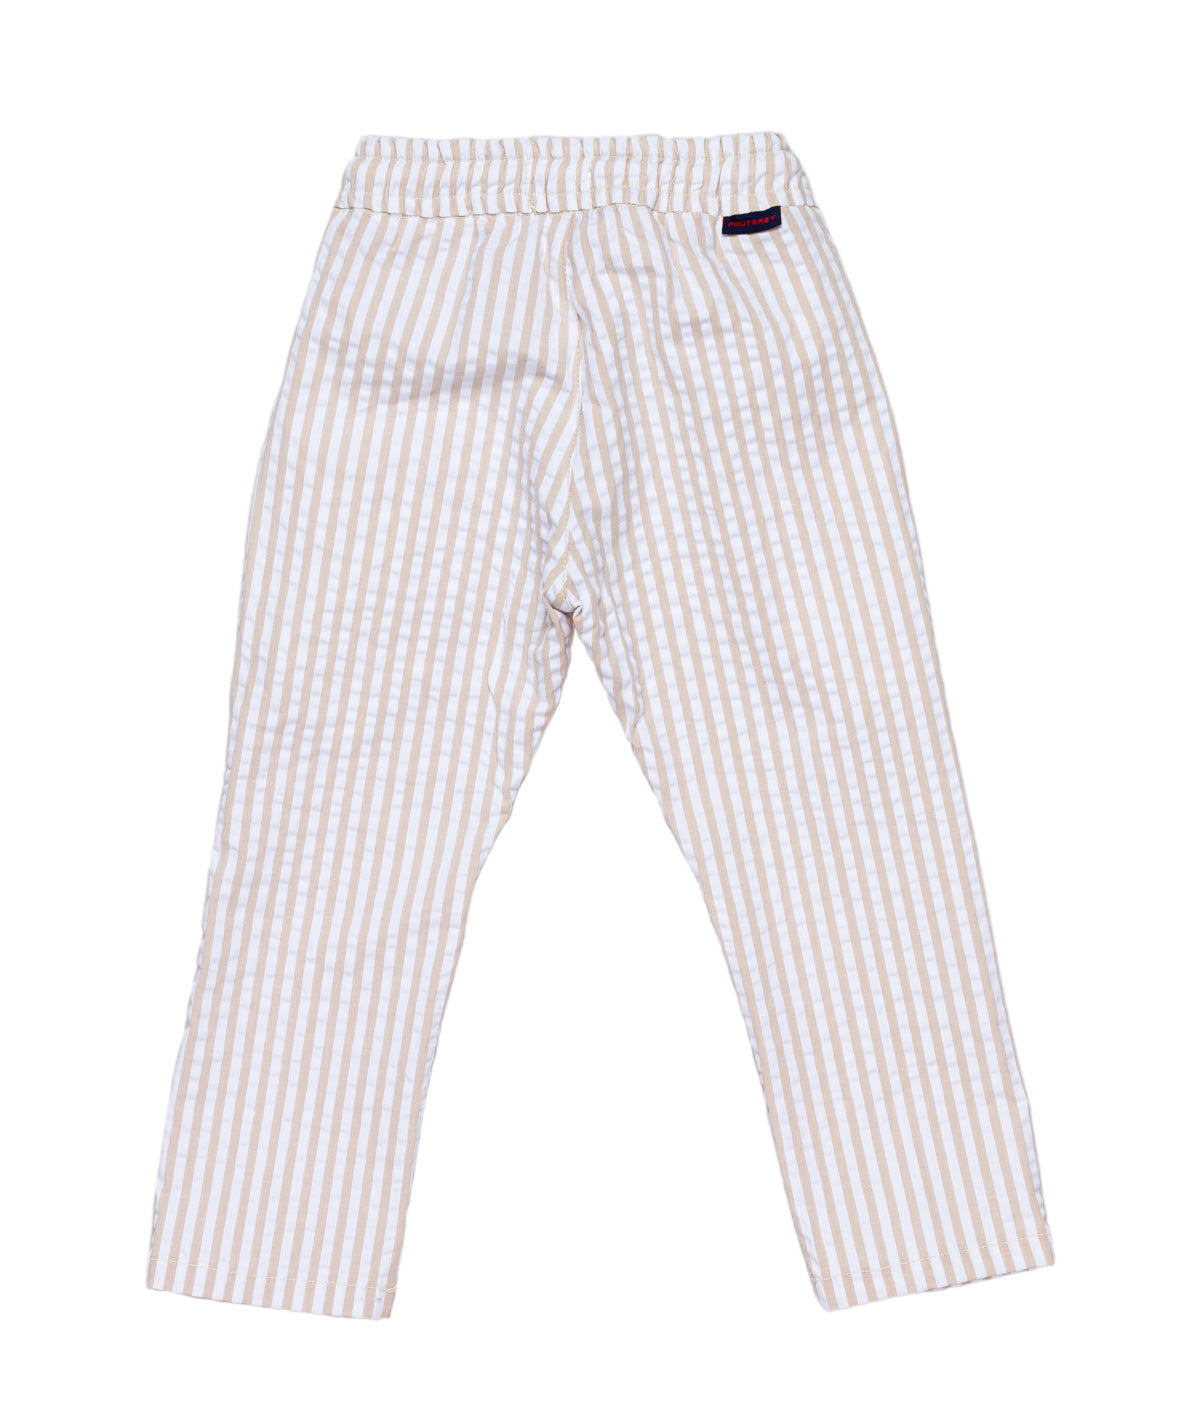 Peuterey trousers